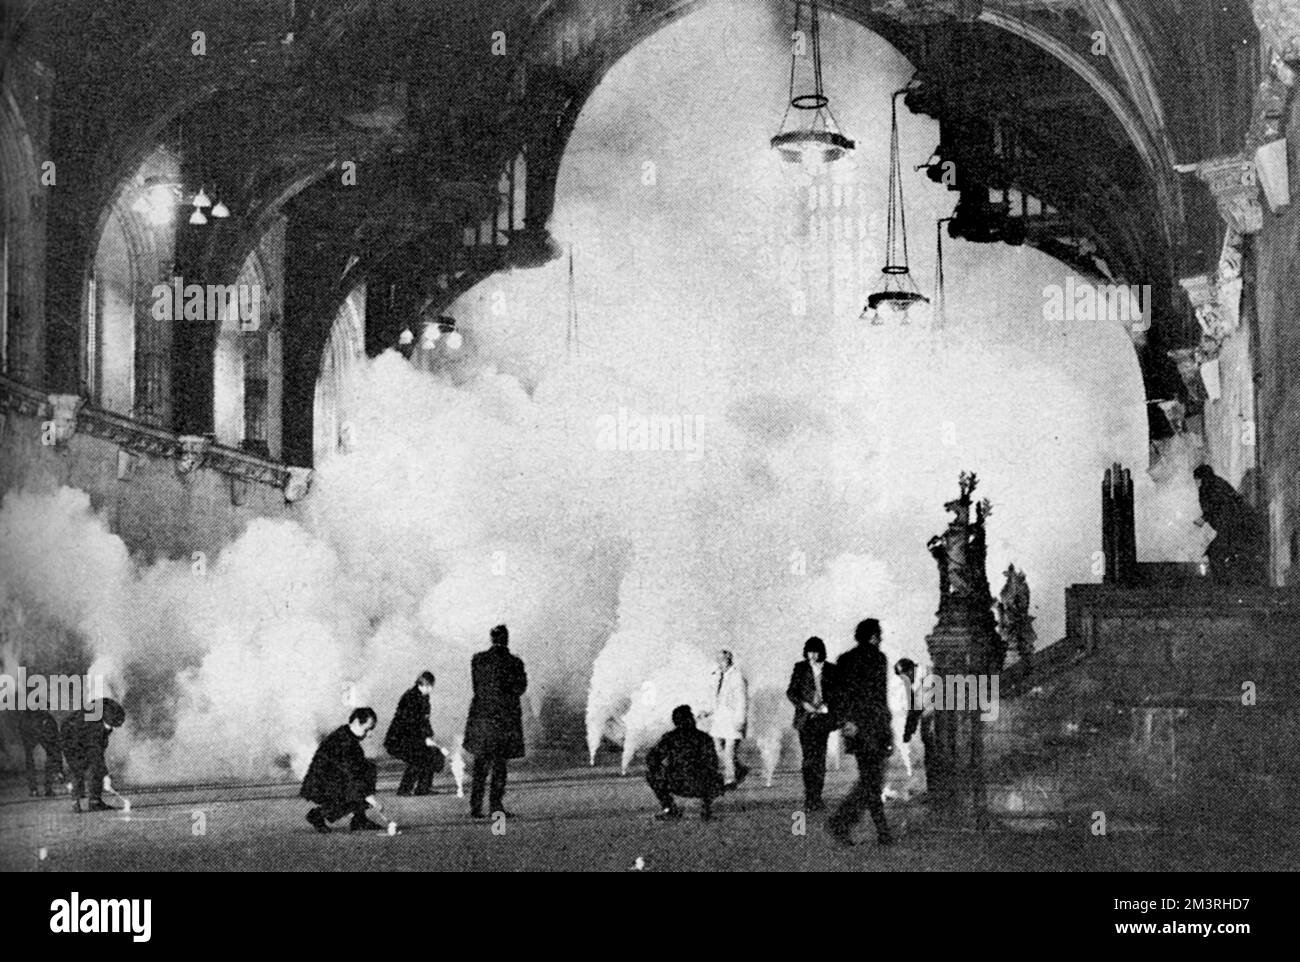 Canisters of pesticide in smoke form being used by the Department of the Environment in 1971 to fumigate Westminster Hall in London, to try to eradicate death watch beetle which has ravaged the roof timbers over the years.     Date: 1971 Stock Photo